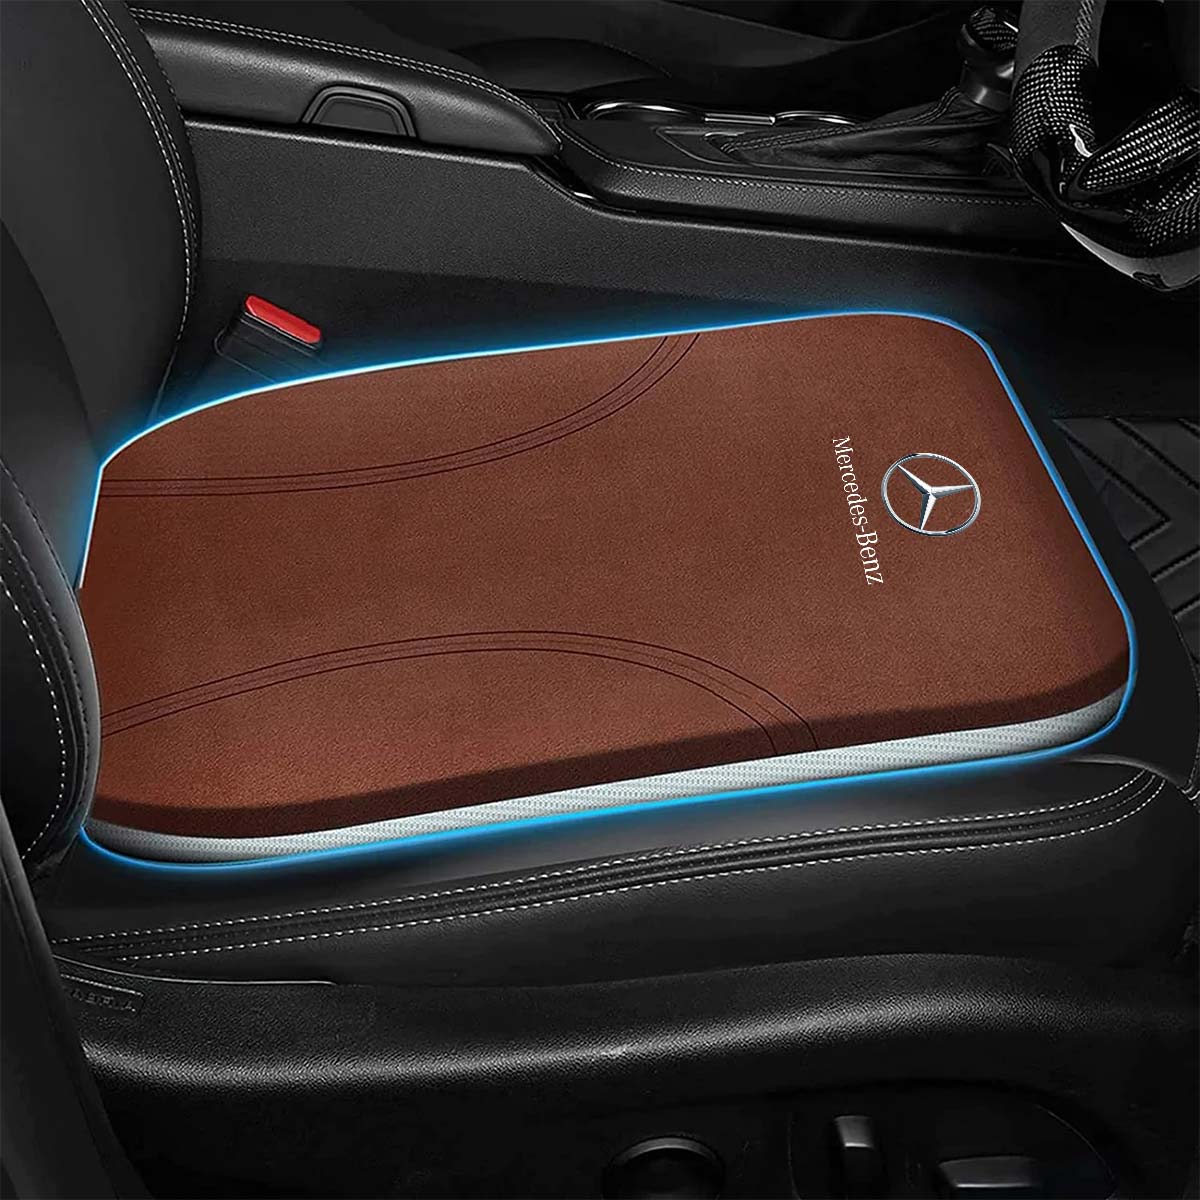 Mercedes Benz Car Seat Cushion: Enhance Comfort and Support for Your Drive